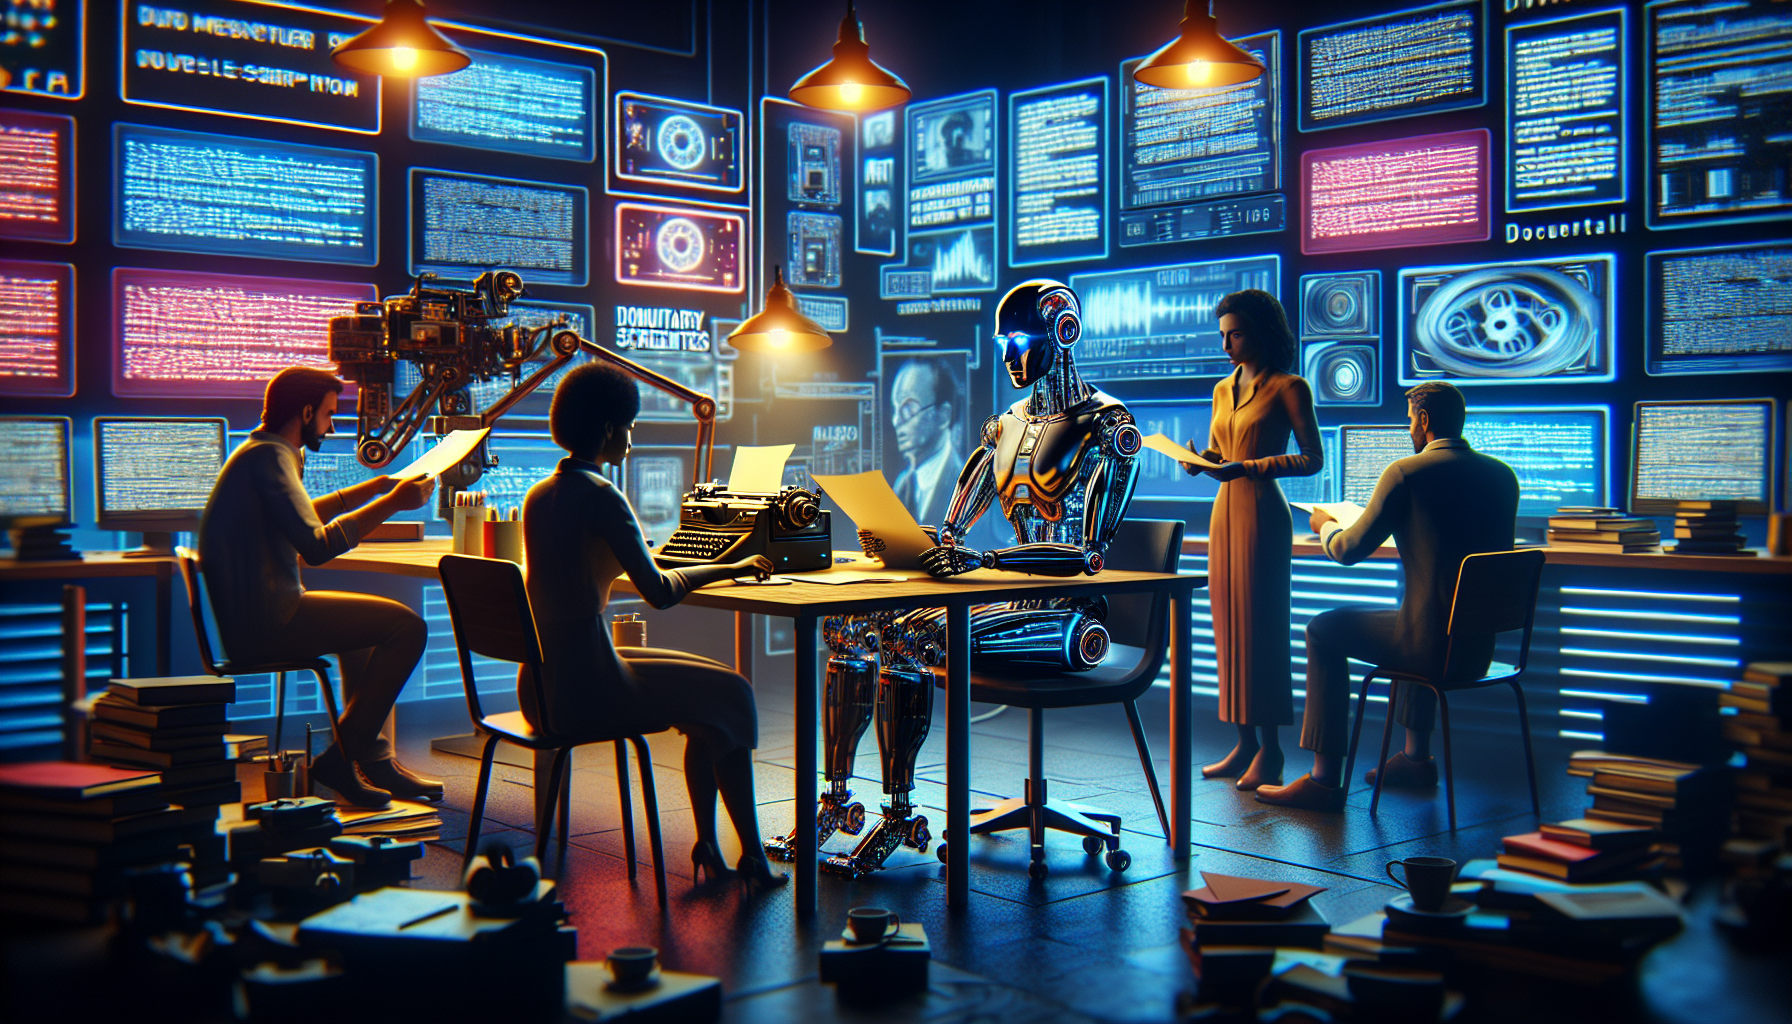 A dimly lit writer's room with a futuristic AI robot sitting at a desk, surrounded by screens displaying documentary scripts and film clips. The robot is intently analyzing data while a diverse group